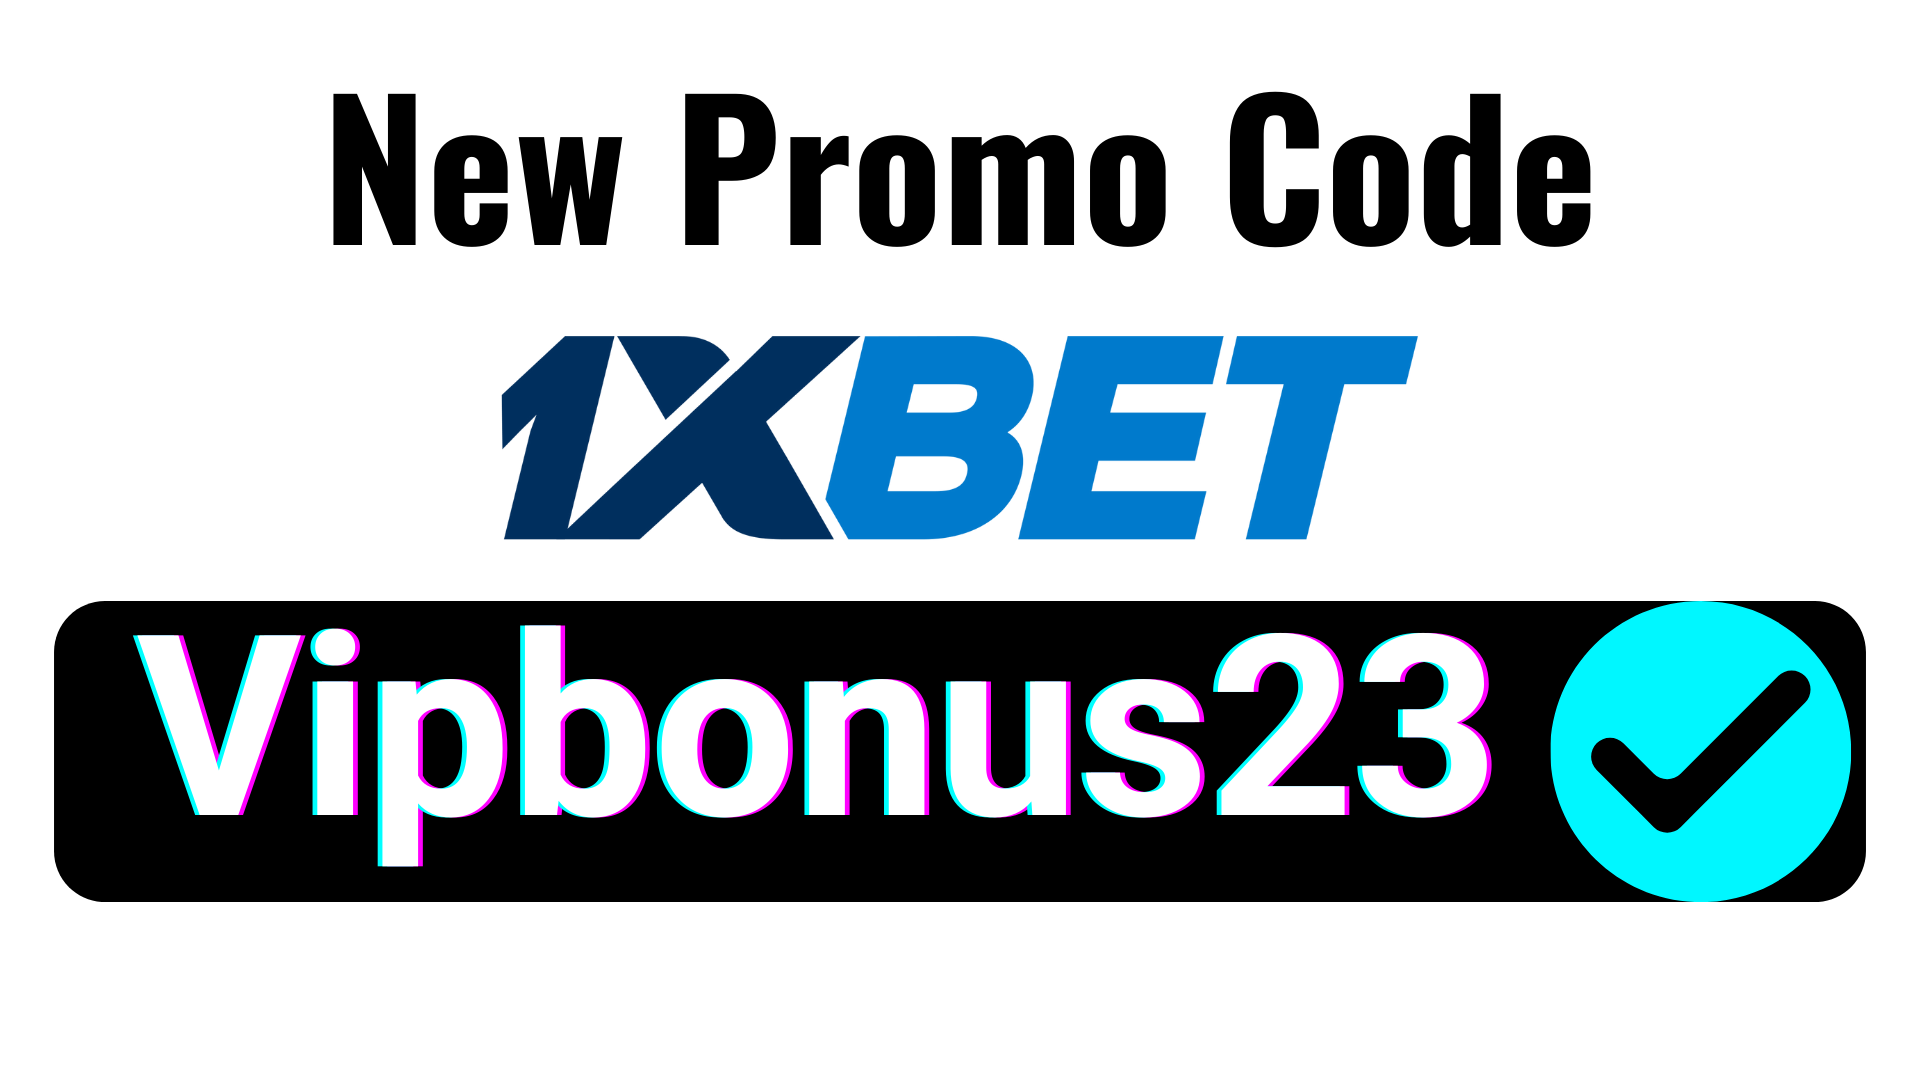 new promo code 1xbet.png